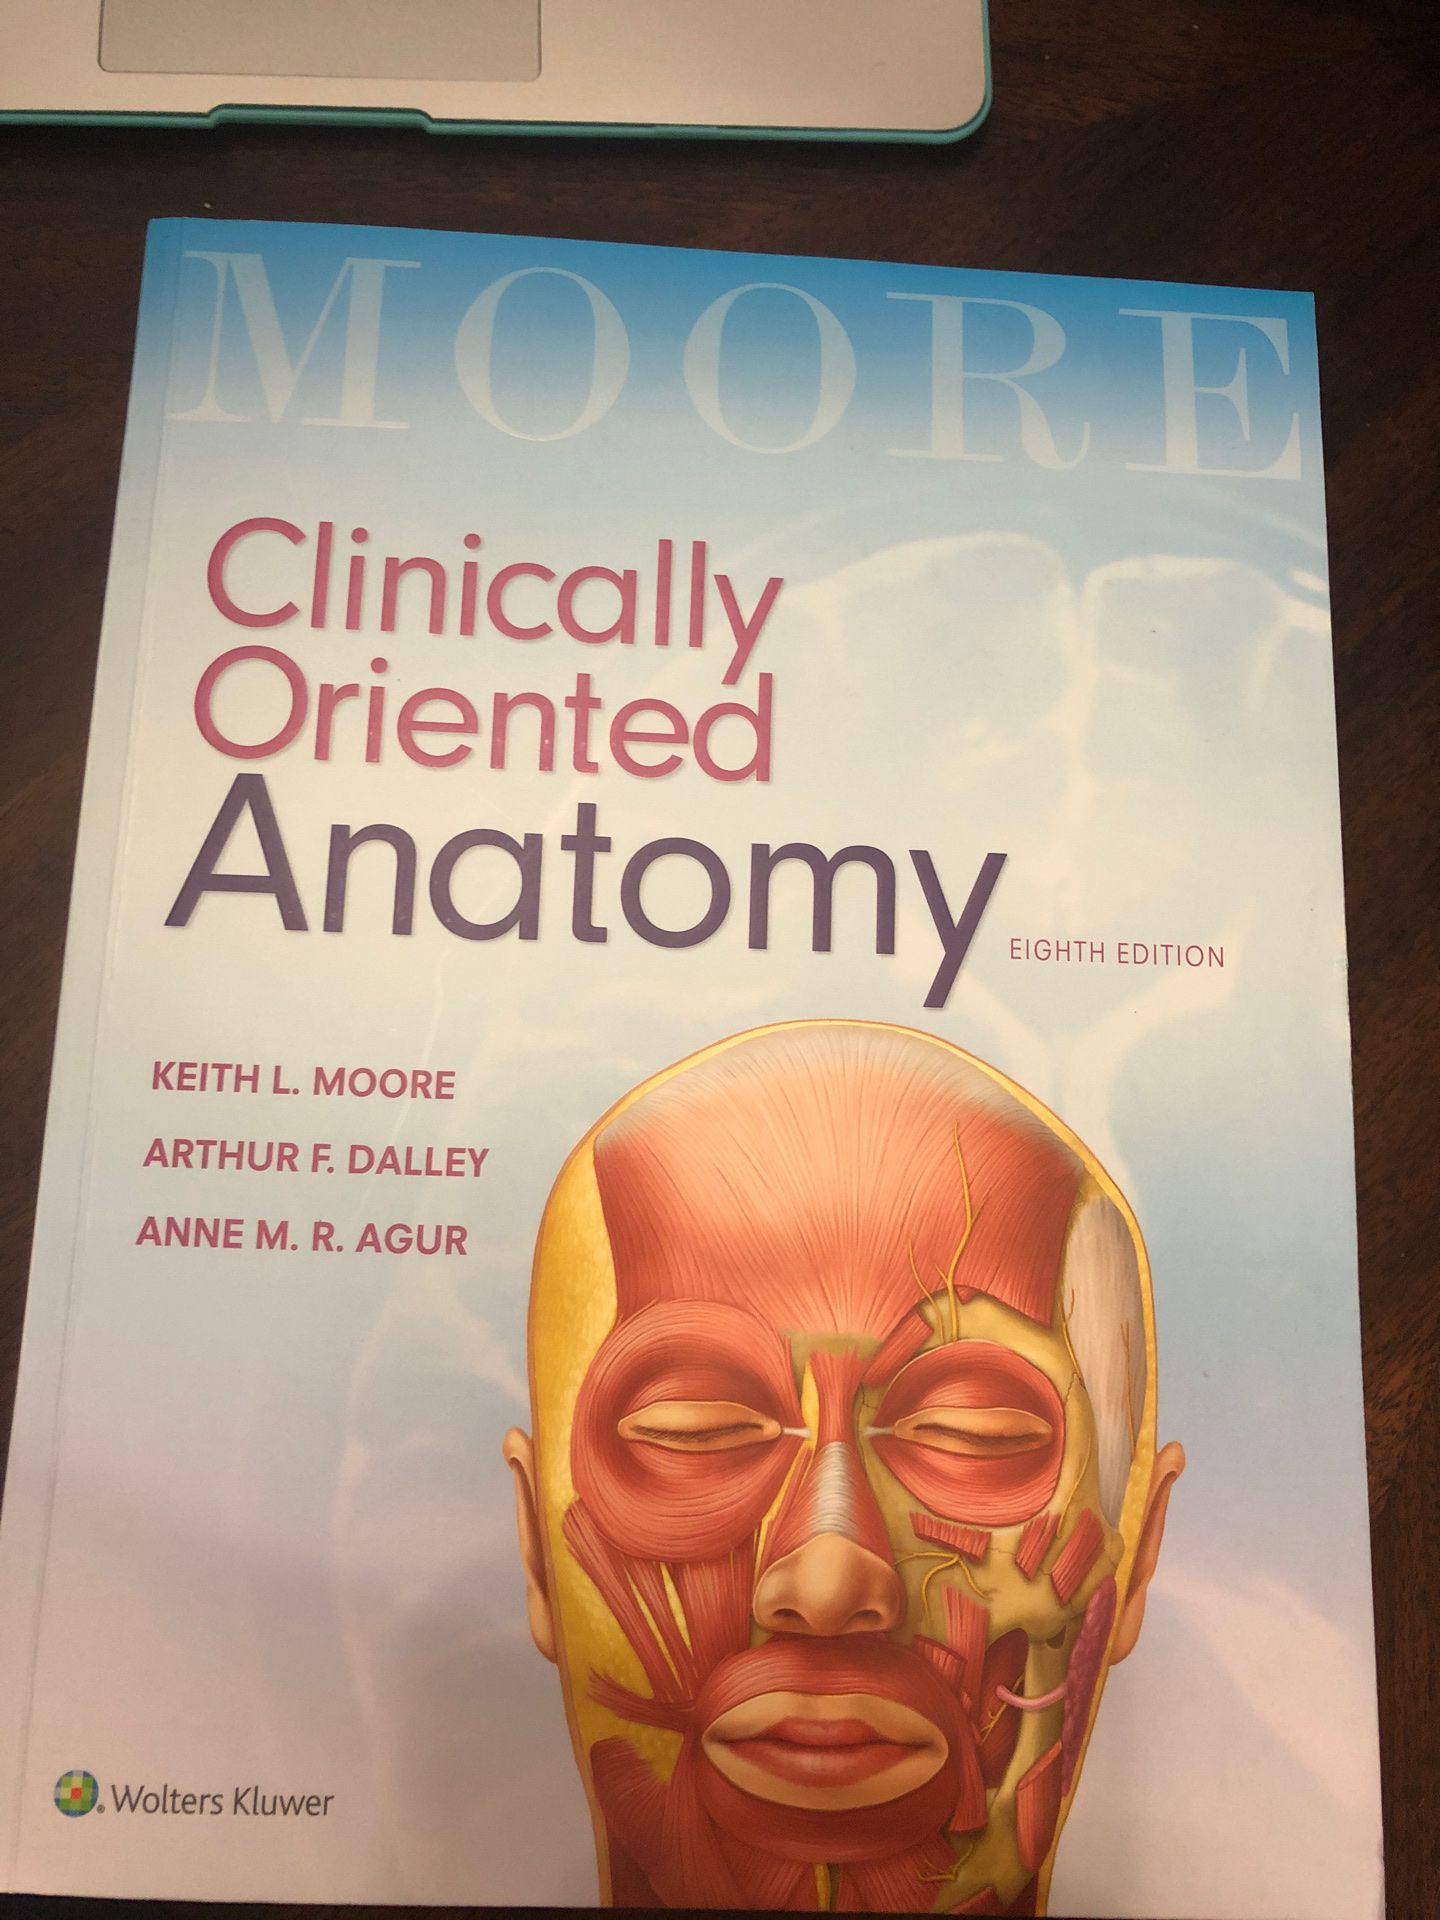 Clinically Oriented Anatomy 8th ed